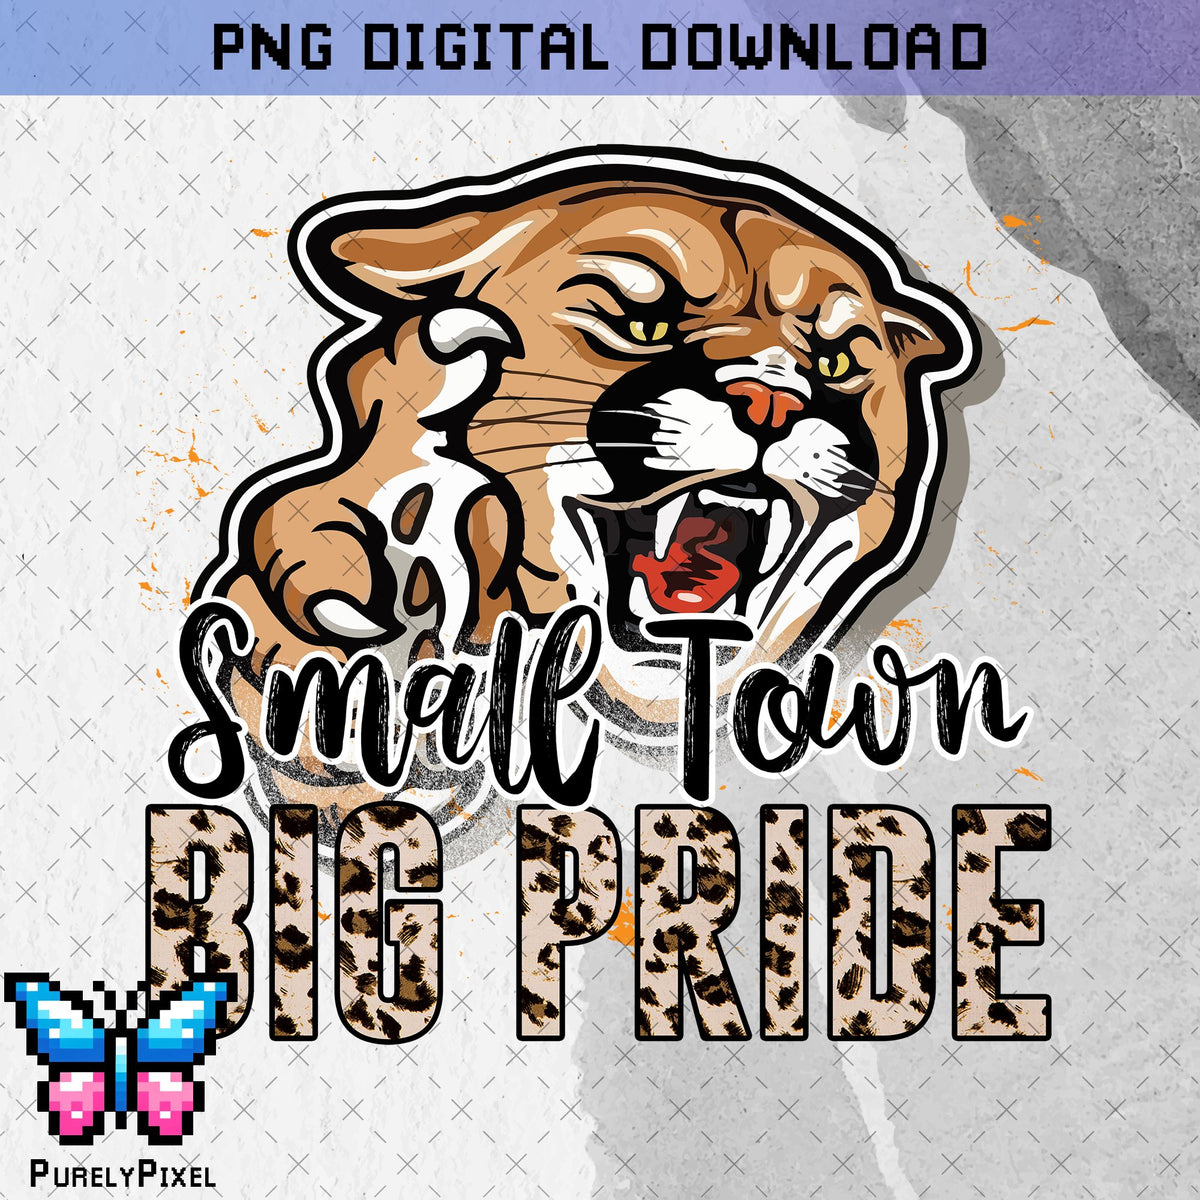 Cougars Small Town Big Pride PNG Design for T-Shirts and More | PurelyPixels | Digital Download